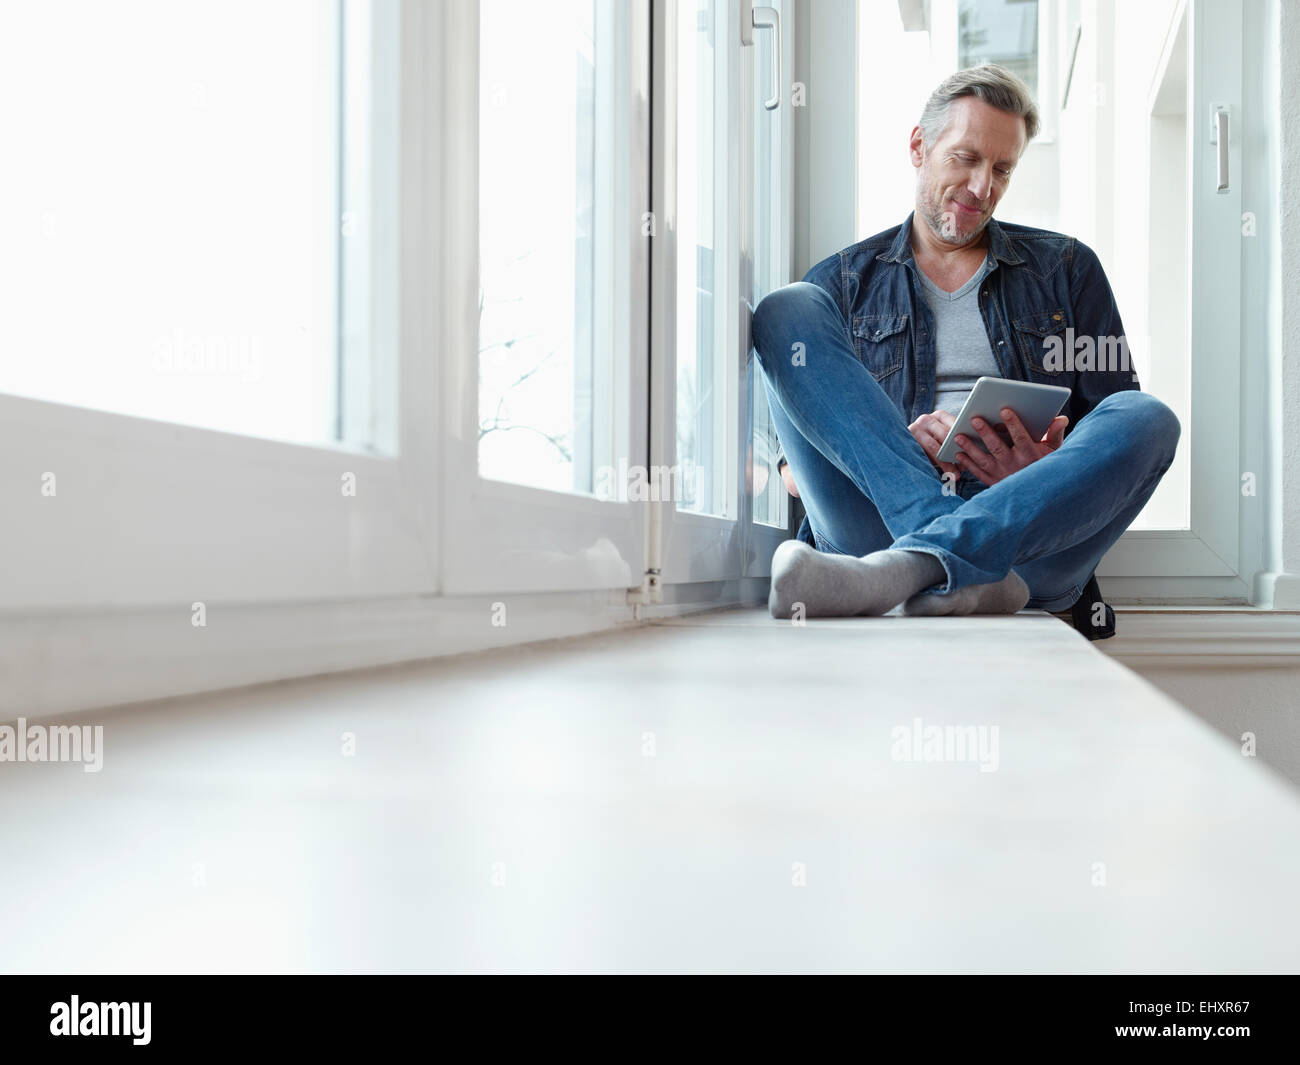 Germany, Cologne, Mature man sitting at window using digital tablet Stock Photo